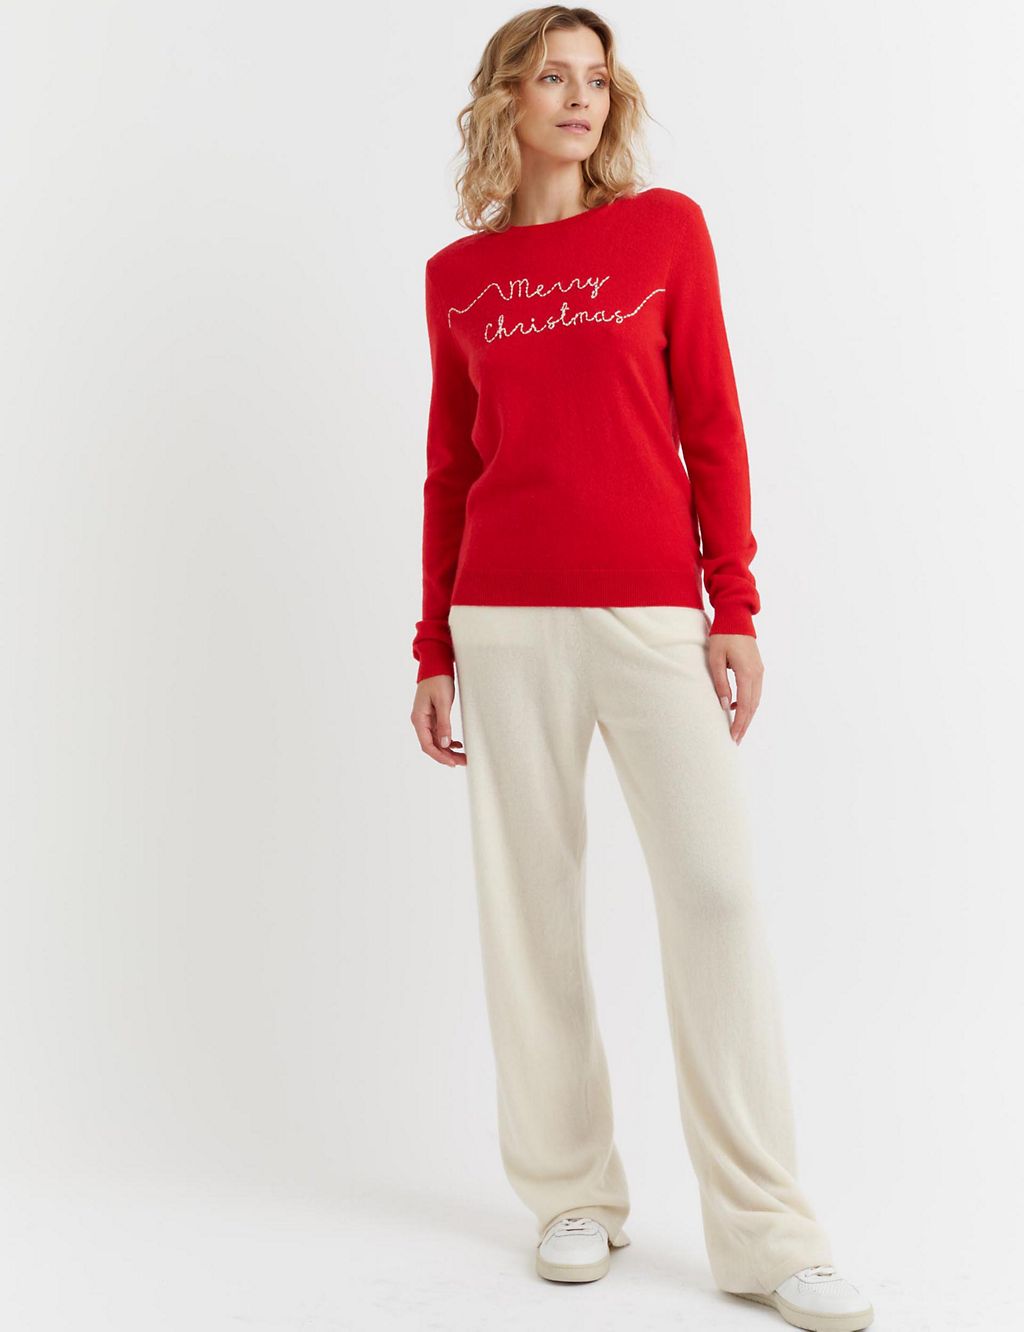 Merry Christmas Slogan Jumper With Cashmere | Chinti & Parker | M&S